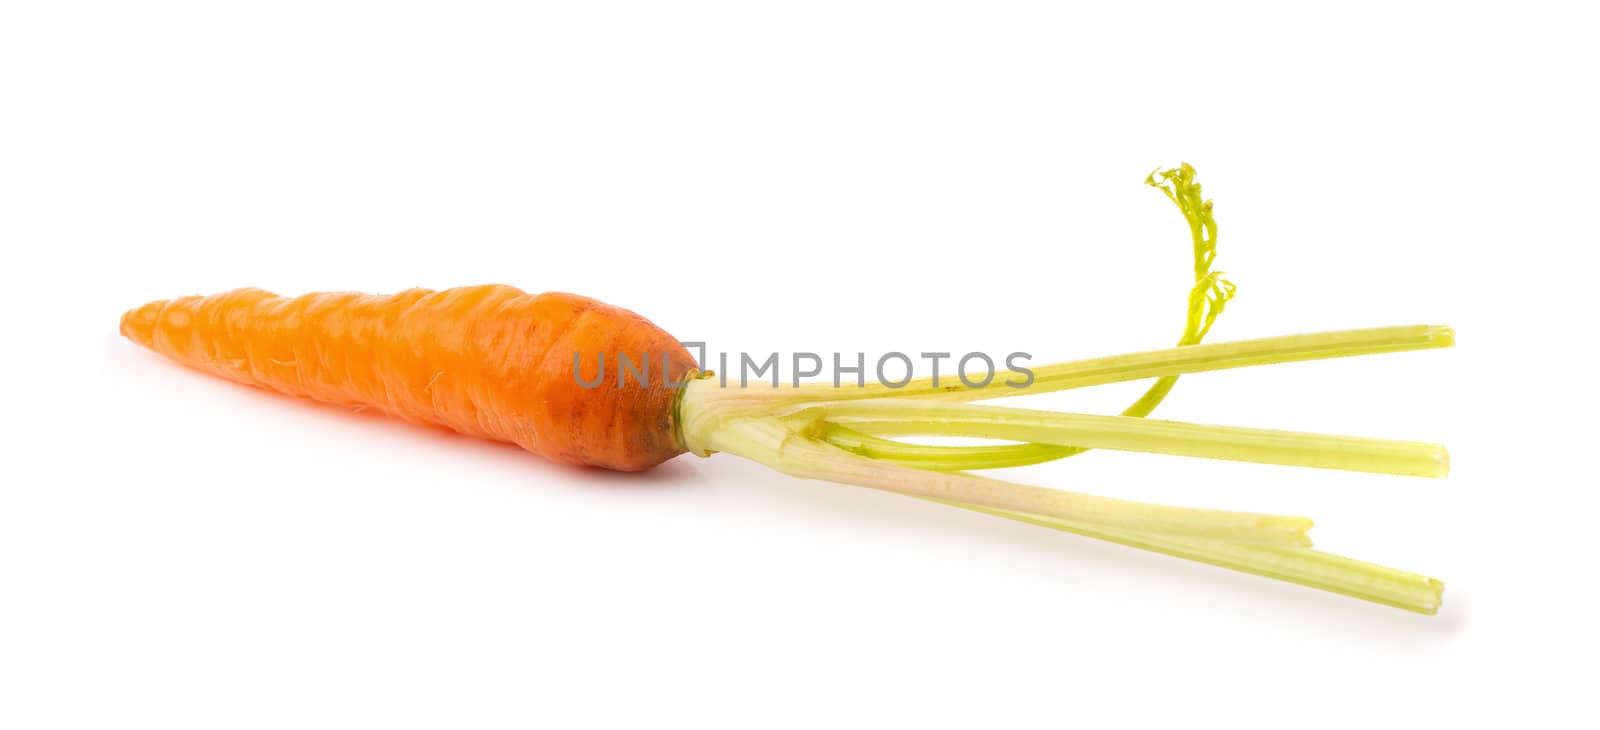 Fresh baby carrots isolated on a white background.